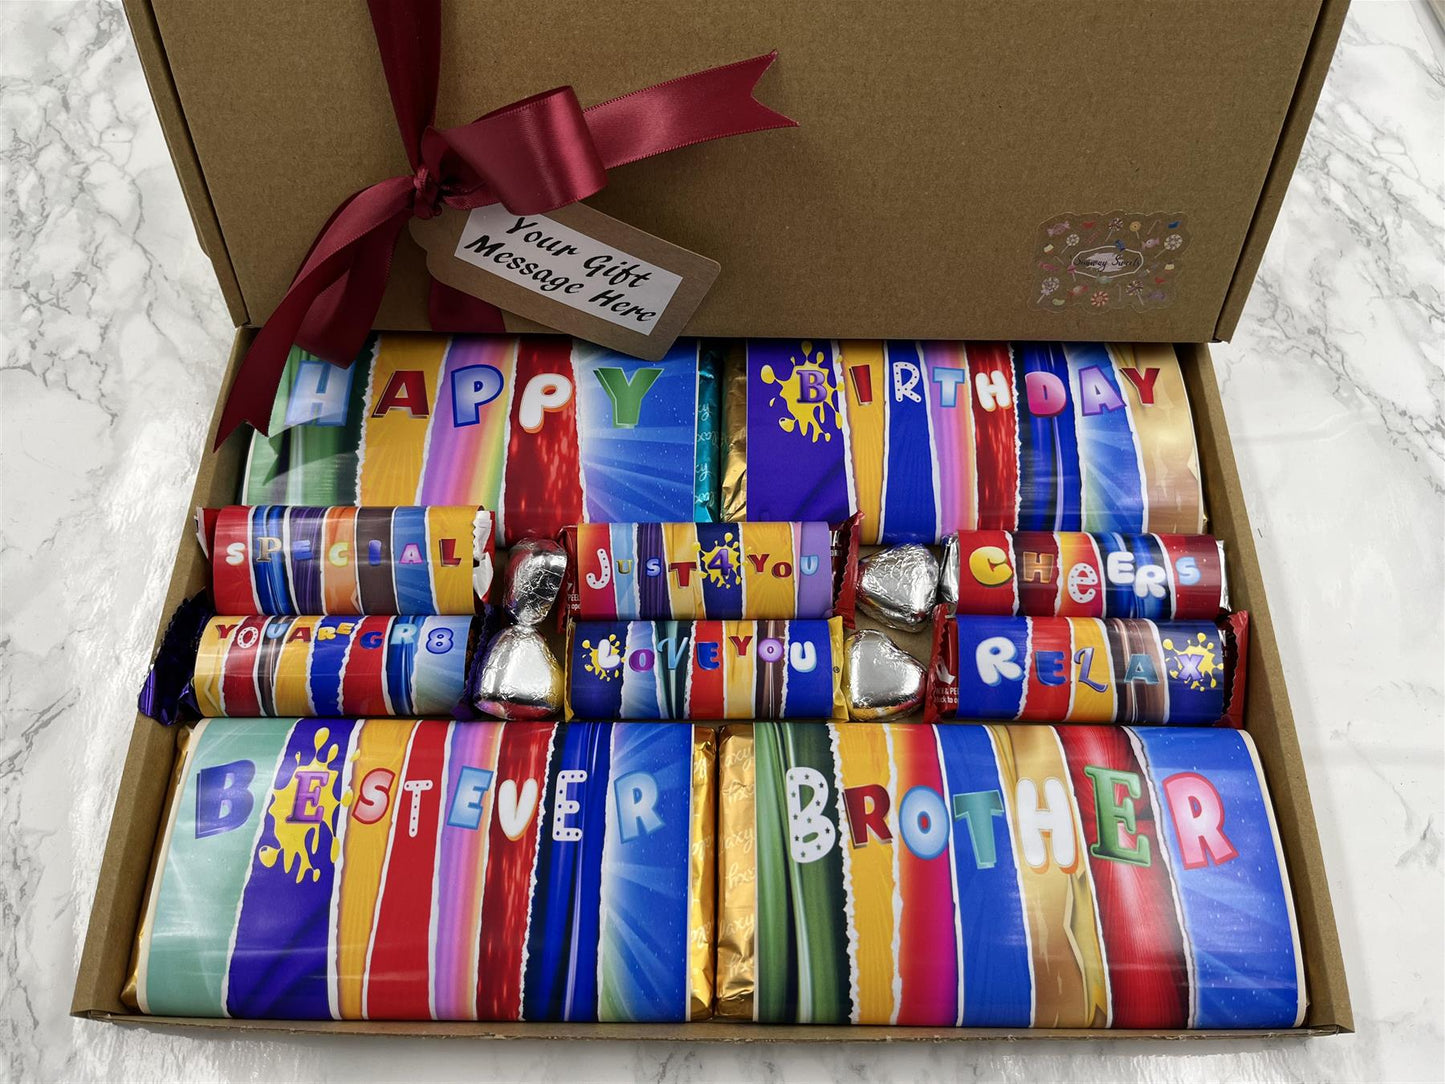 Fun Novelty Birthday Chocolate Wrapper Gift Box - Brother